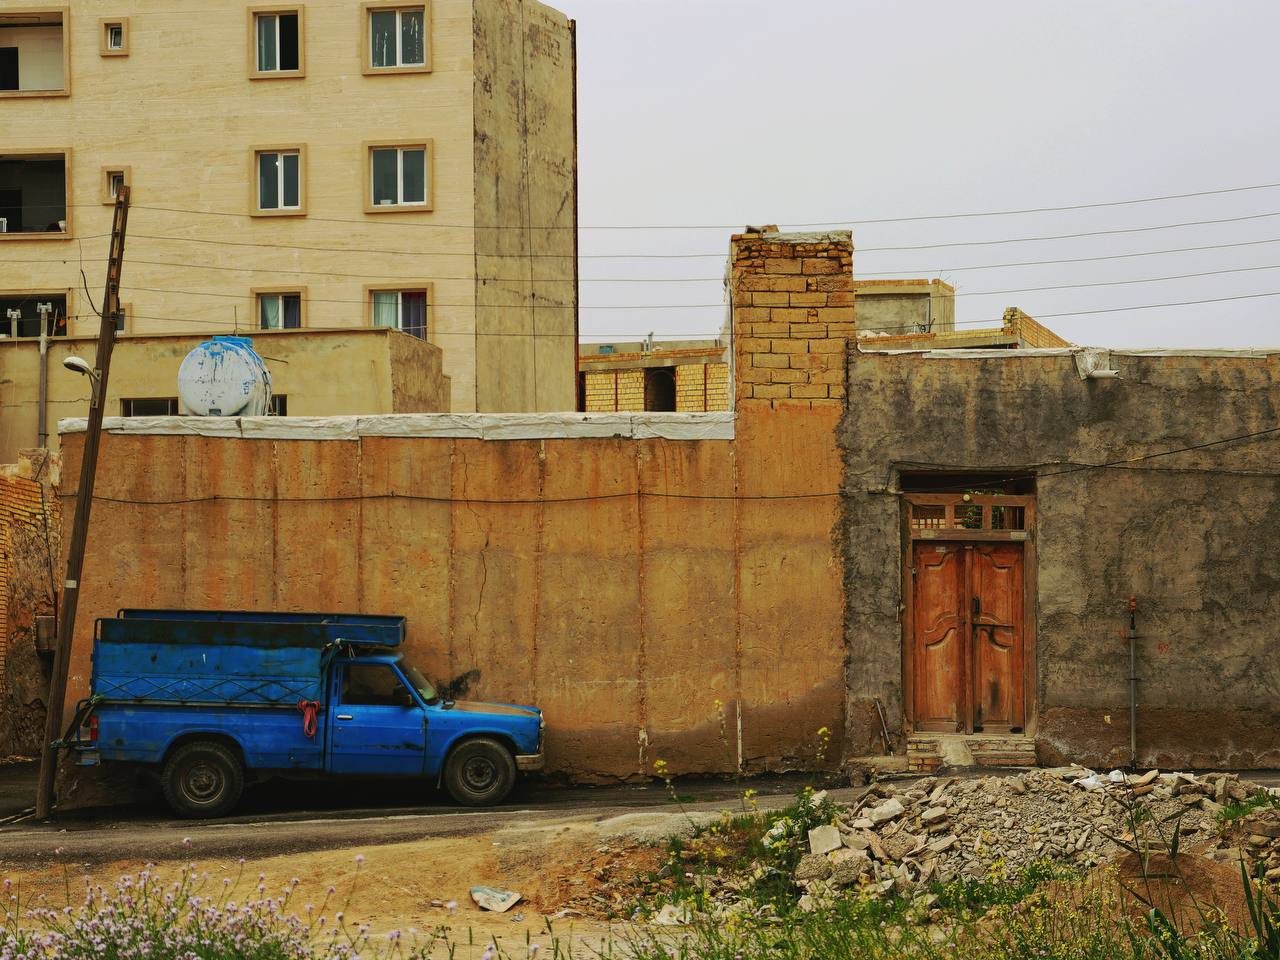 a blue truck parked in front of a building